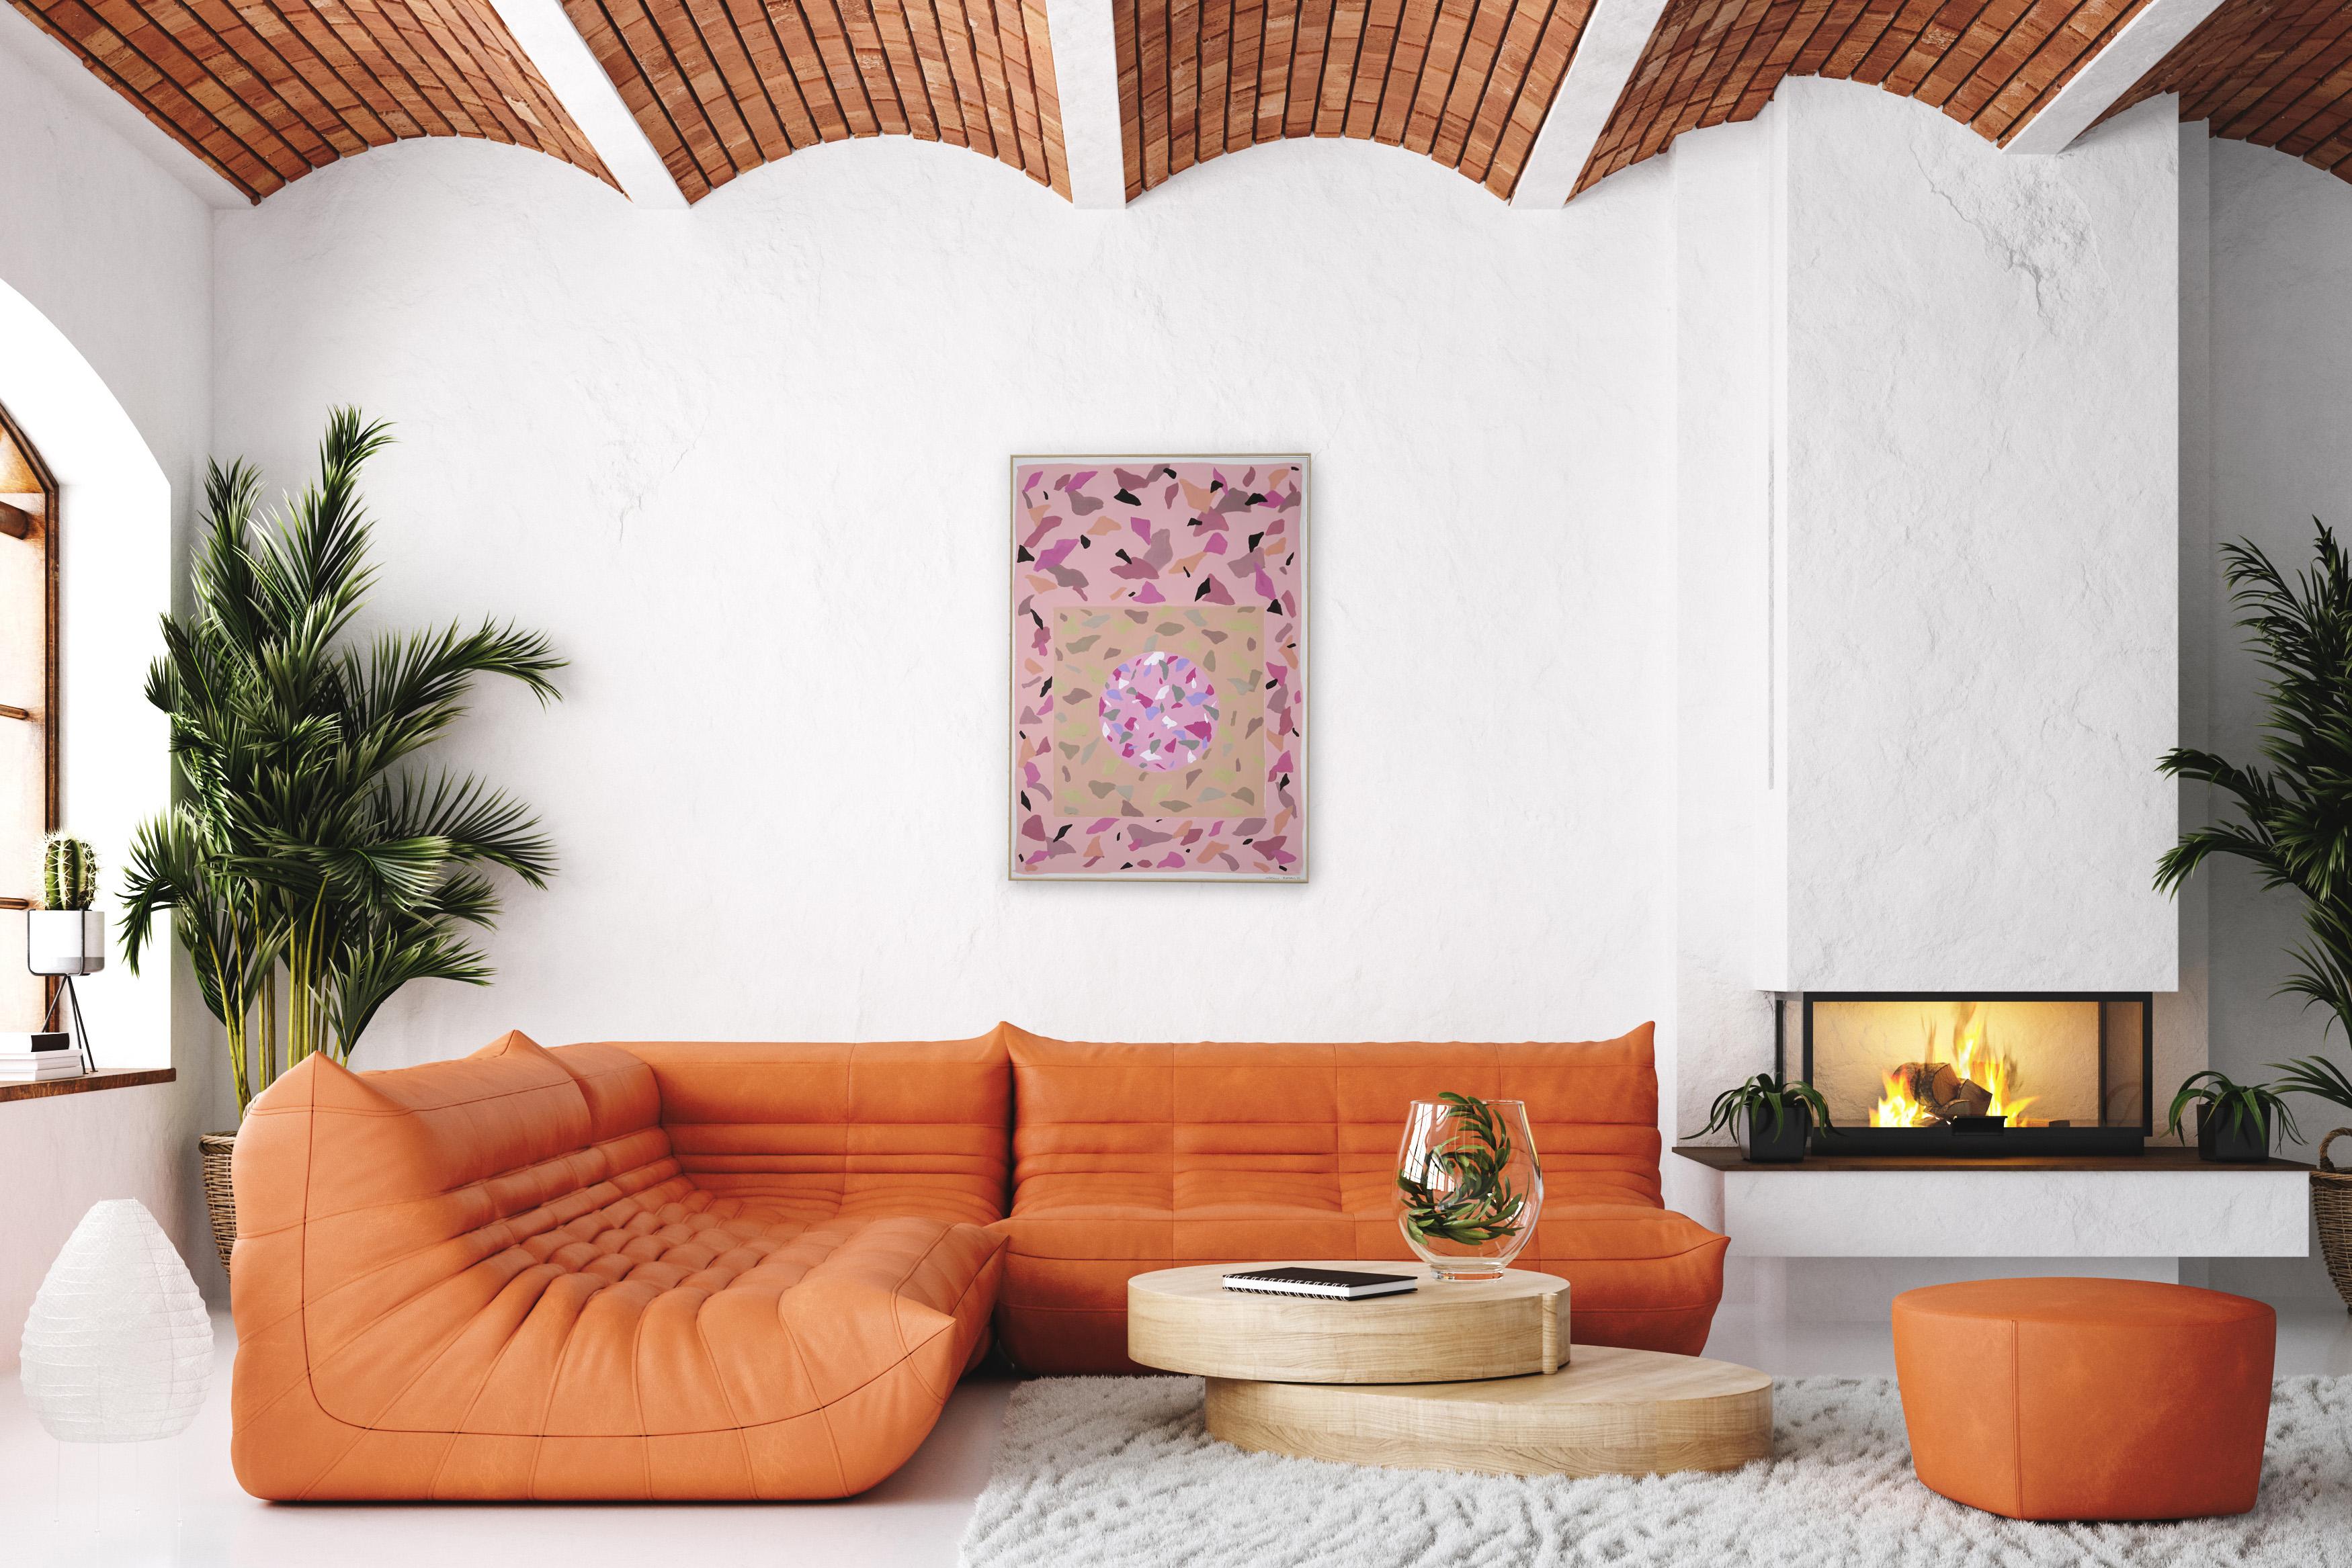 Pastel Pink Shapes, Italian Terrazzo Tiles Inspiration in Soft Warm Skin Tones  - Painting by Natalia Roman